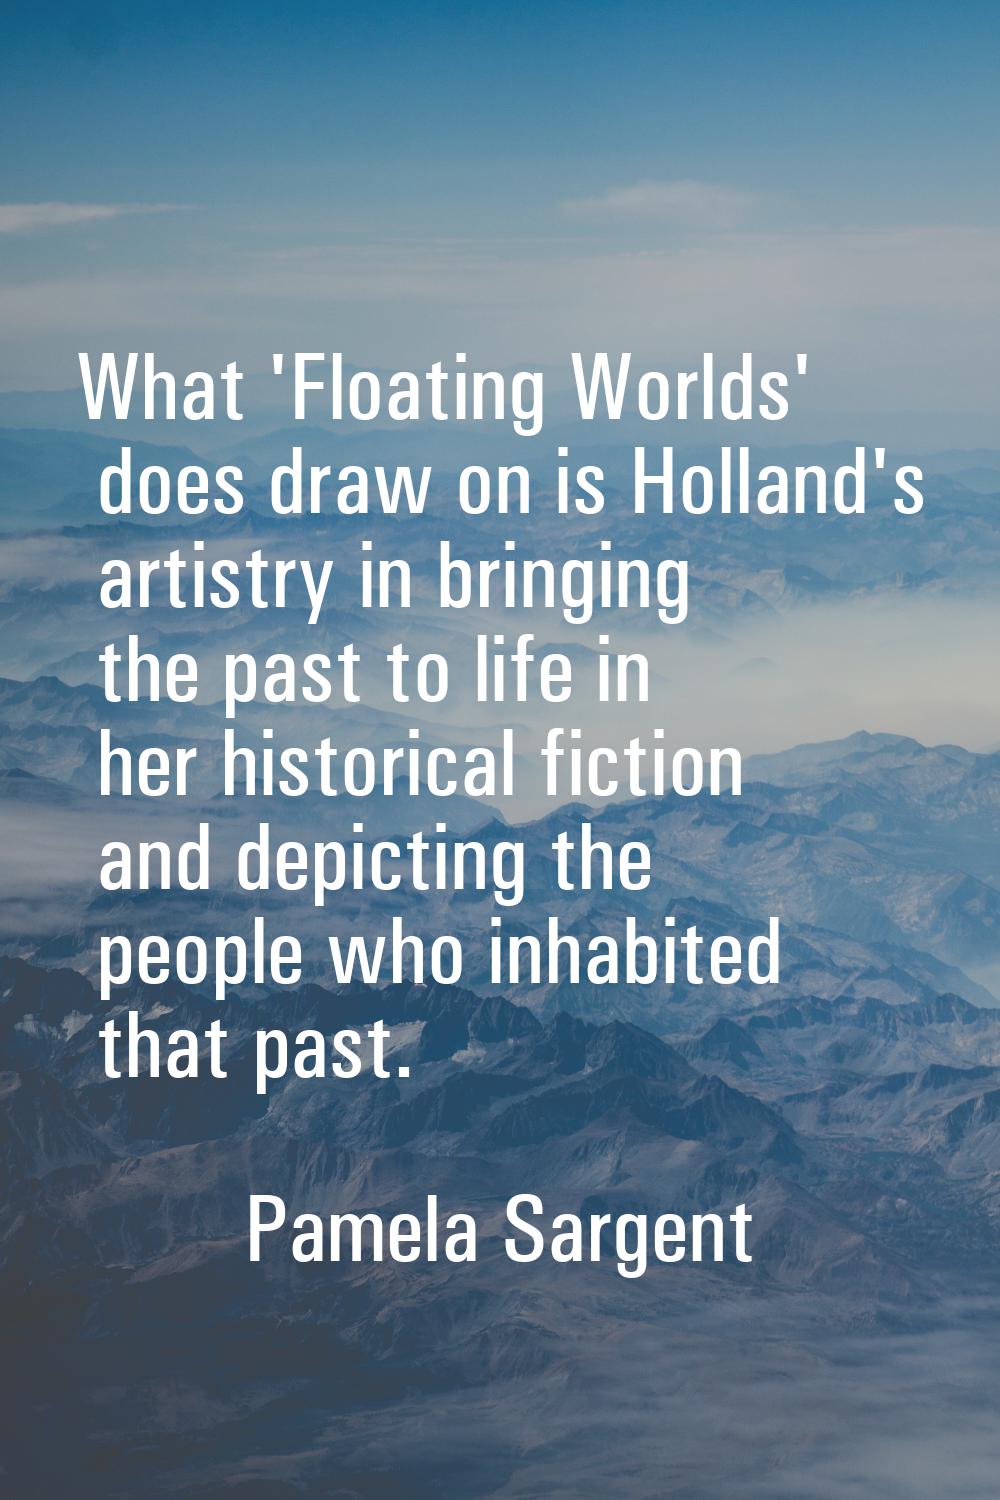 What 'Floating Worlds' does draw on is Holland's artistry in bringing the past to life in her histo